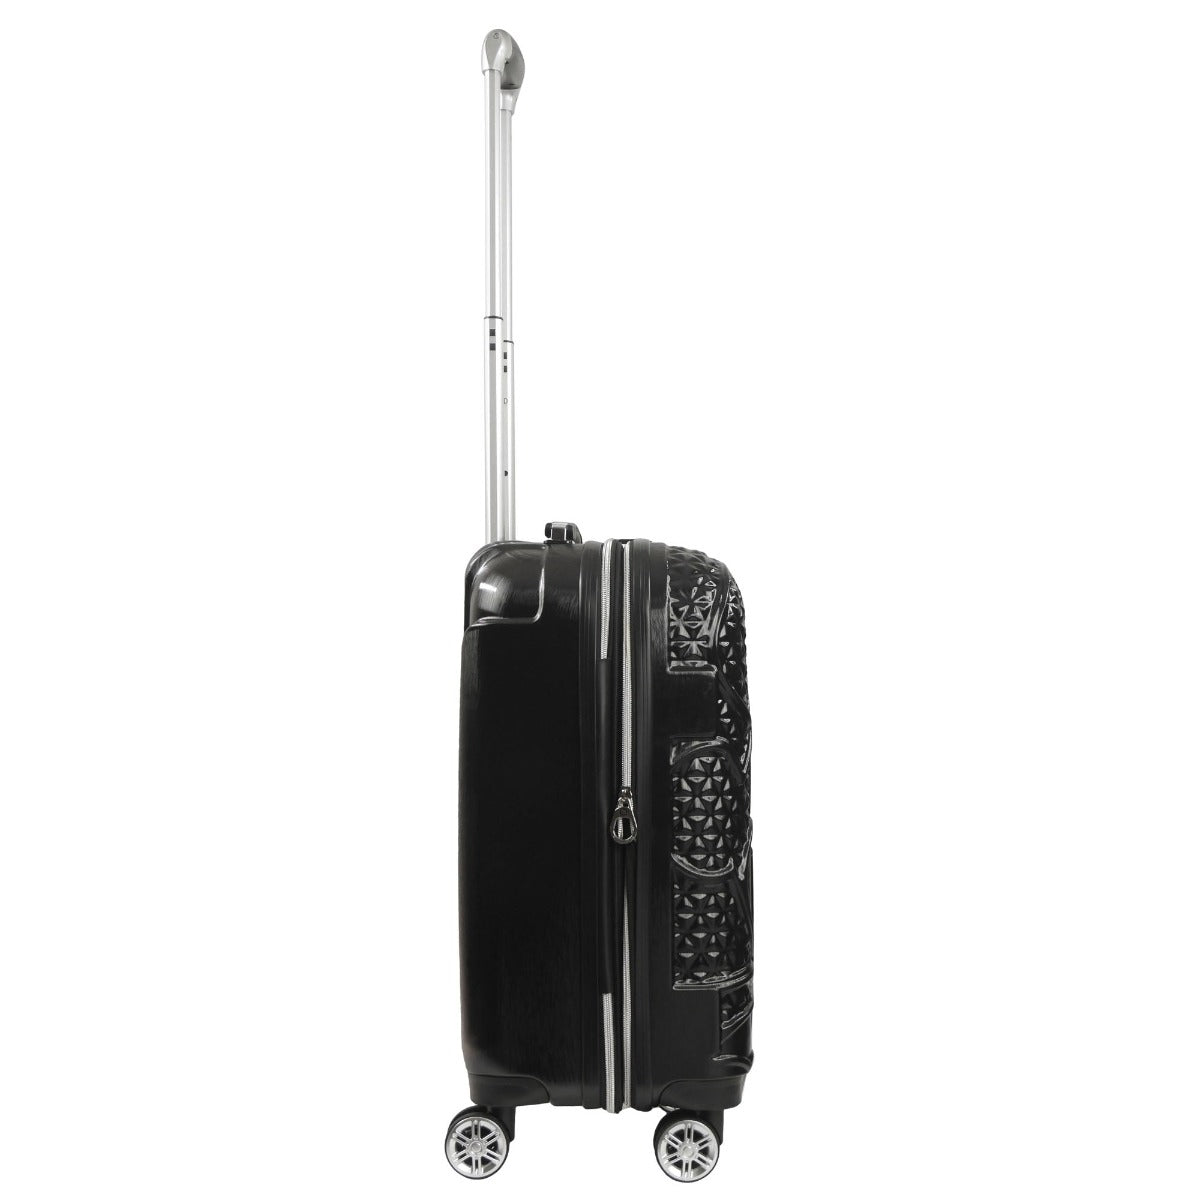 Black Disney Mickey Mouse textured raised shape 22.5 inch hardside spinner suitcase with ID tags- best hard shell carry-on luggage